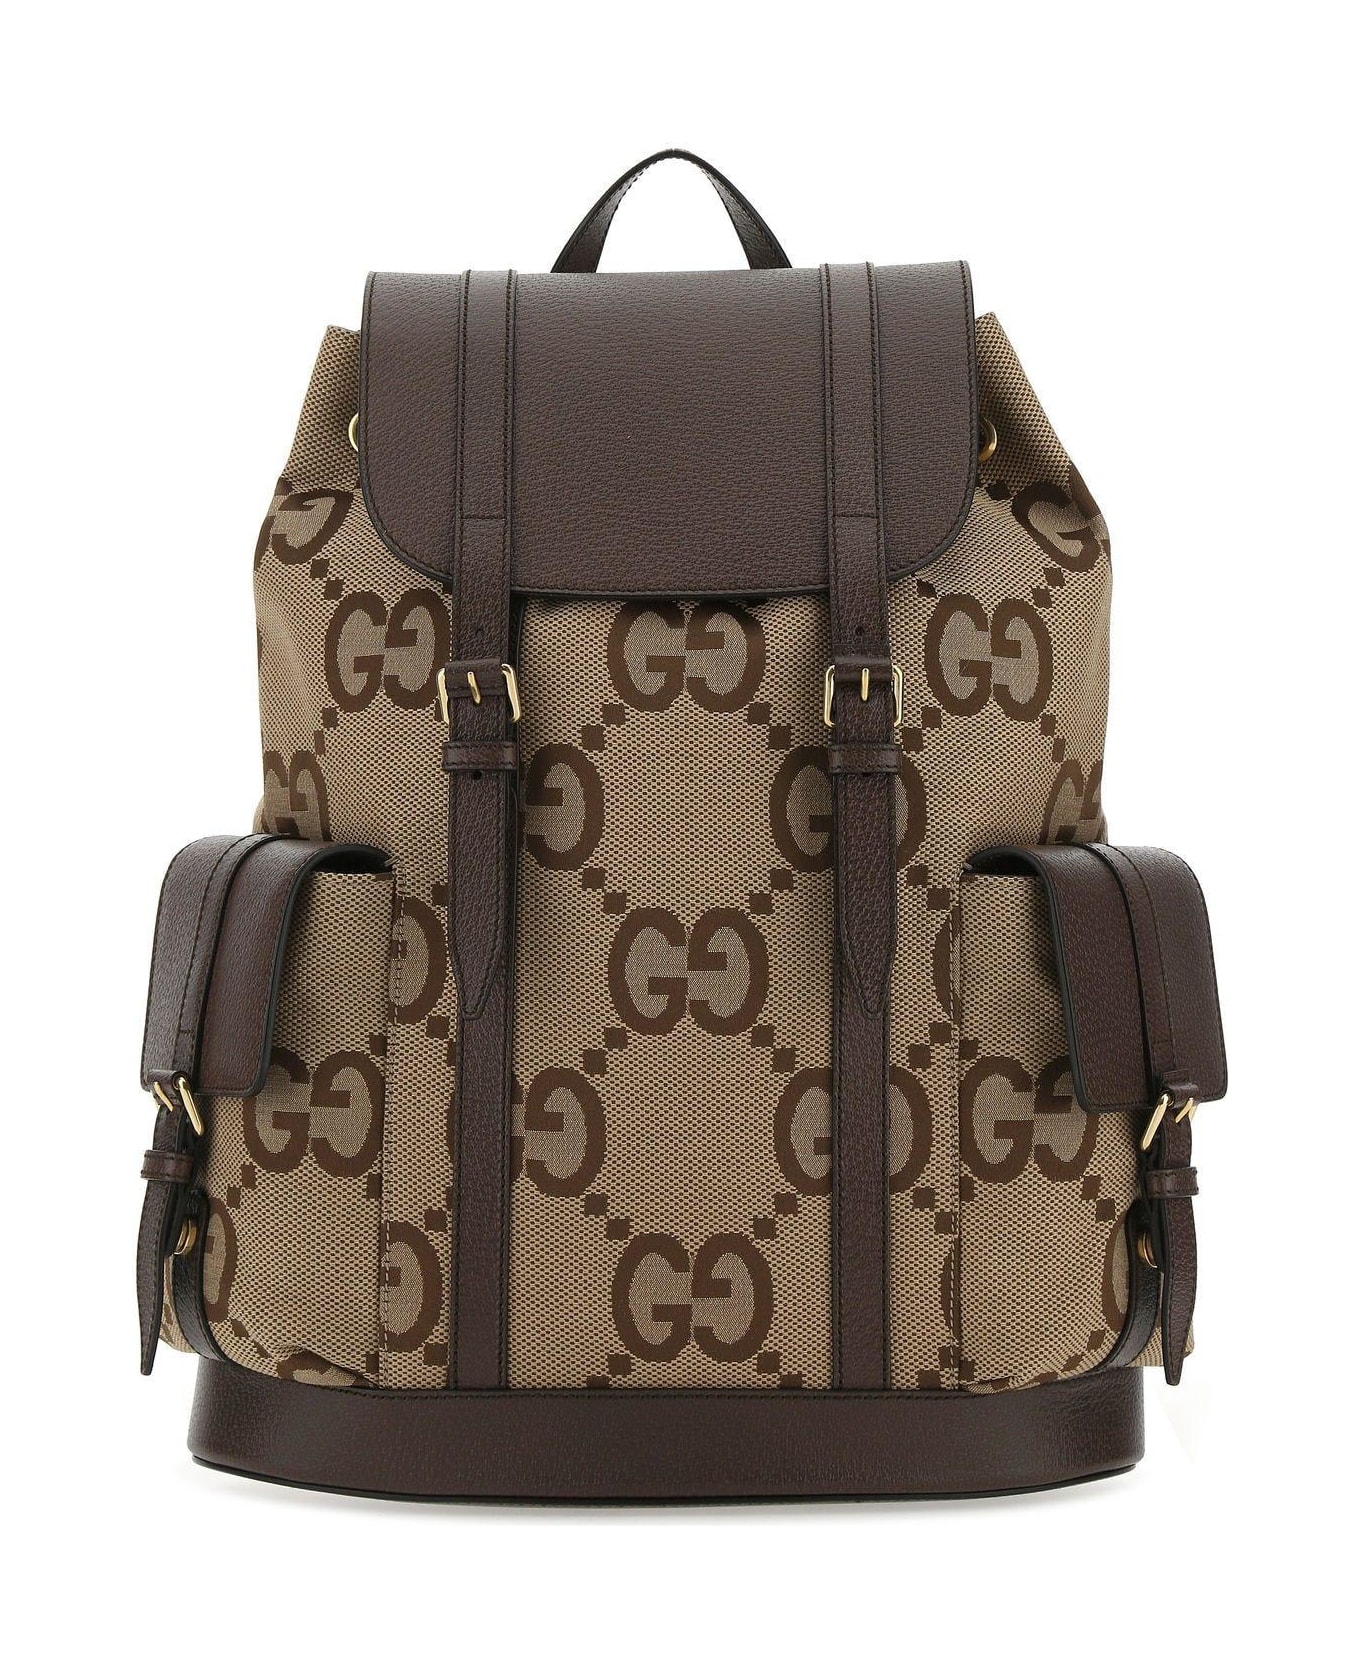 Gucci Multicolor Jumbo Gg Fabric And Leather Backpack - Beige